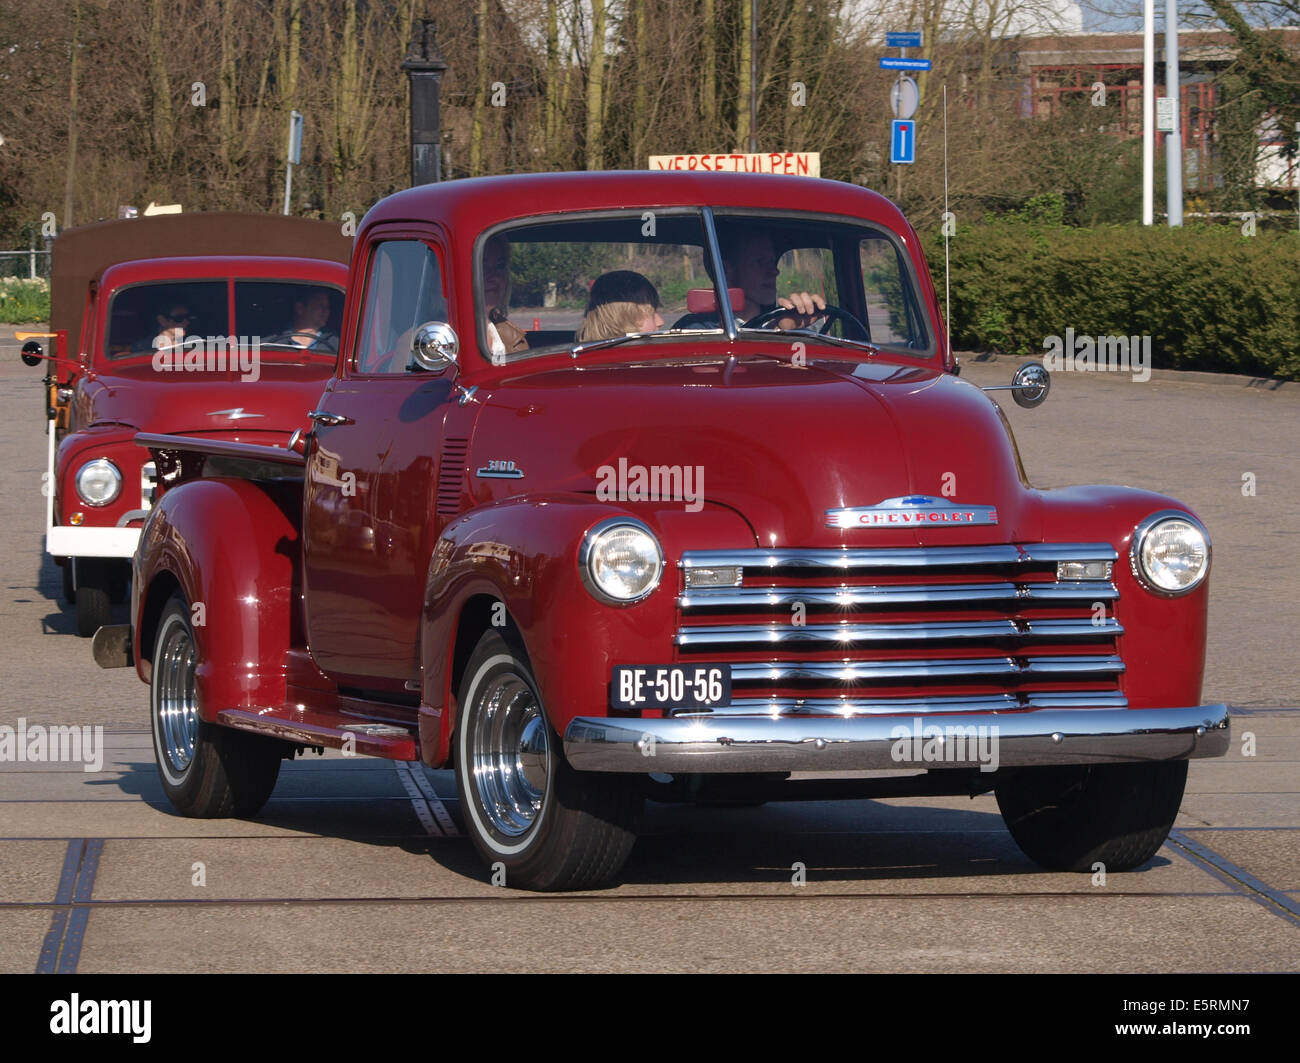 1953 Chevrolet 3100 Pick-Up, Dutch licence registration BE-50-56, pic2 Stock Photo